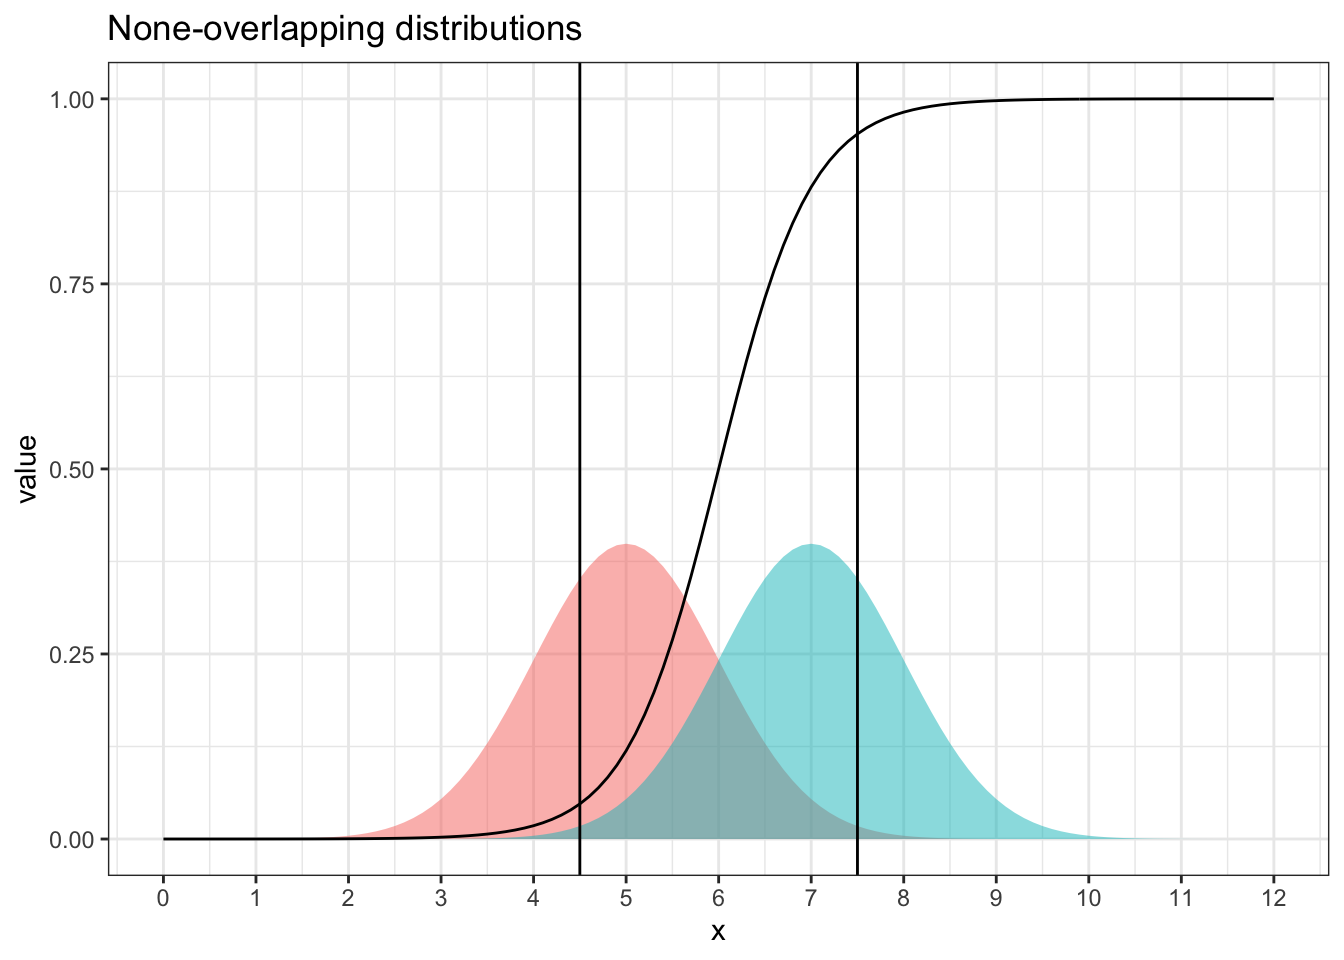 Two Distributions have large lack-of-overlapping areas with propensity function (of being from the distribution on the right). area outside the two vertical lines have propensity scores close to 0 or 1, indicating poor matching and high variance.